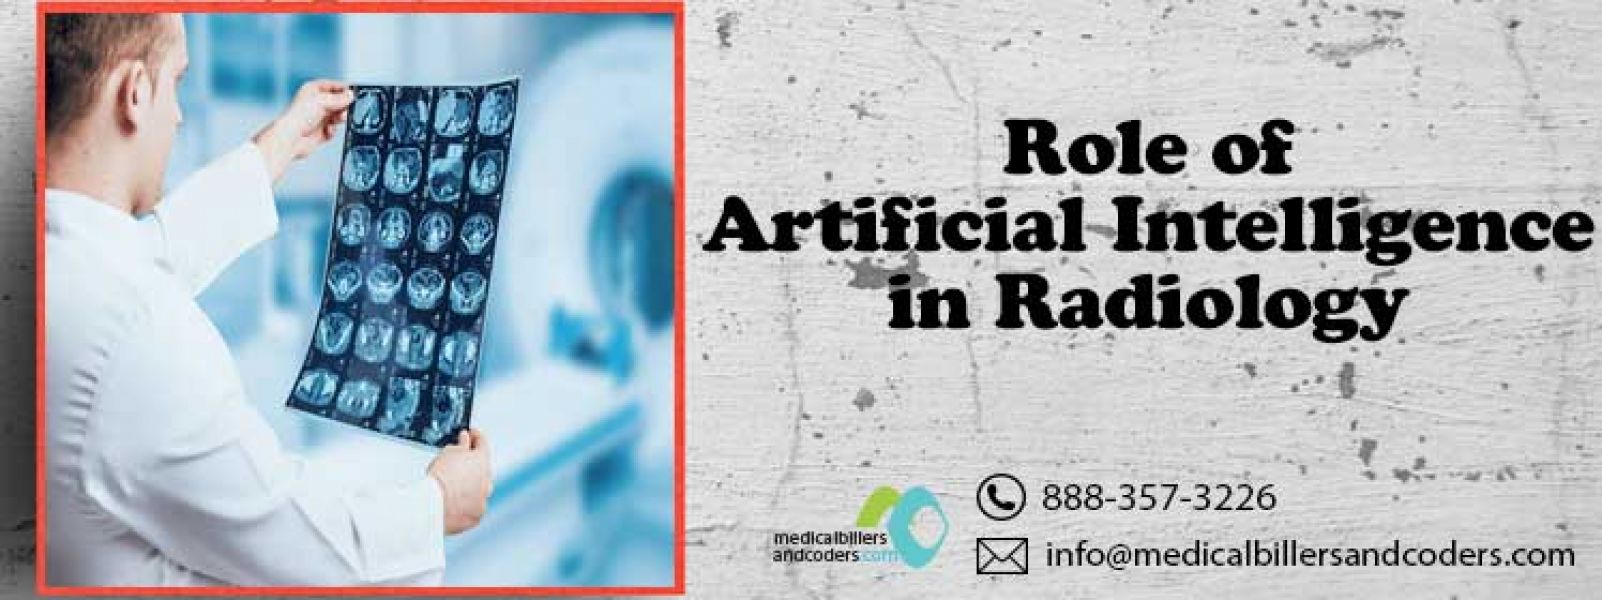 Role of Artificial Intelligence in Radiology